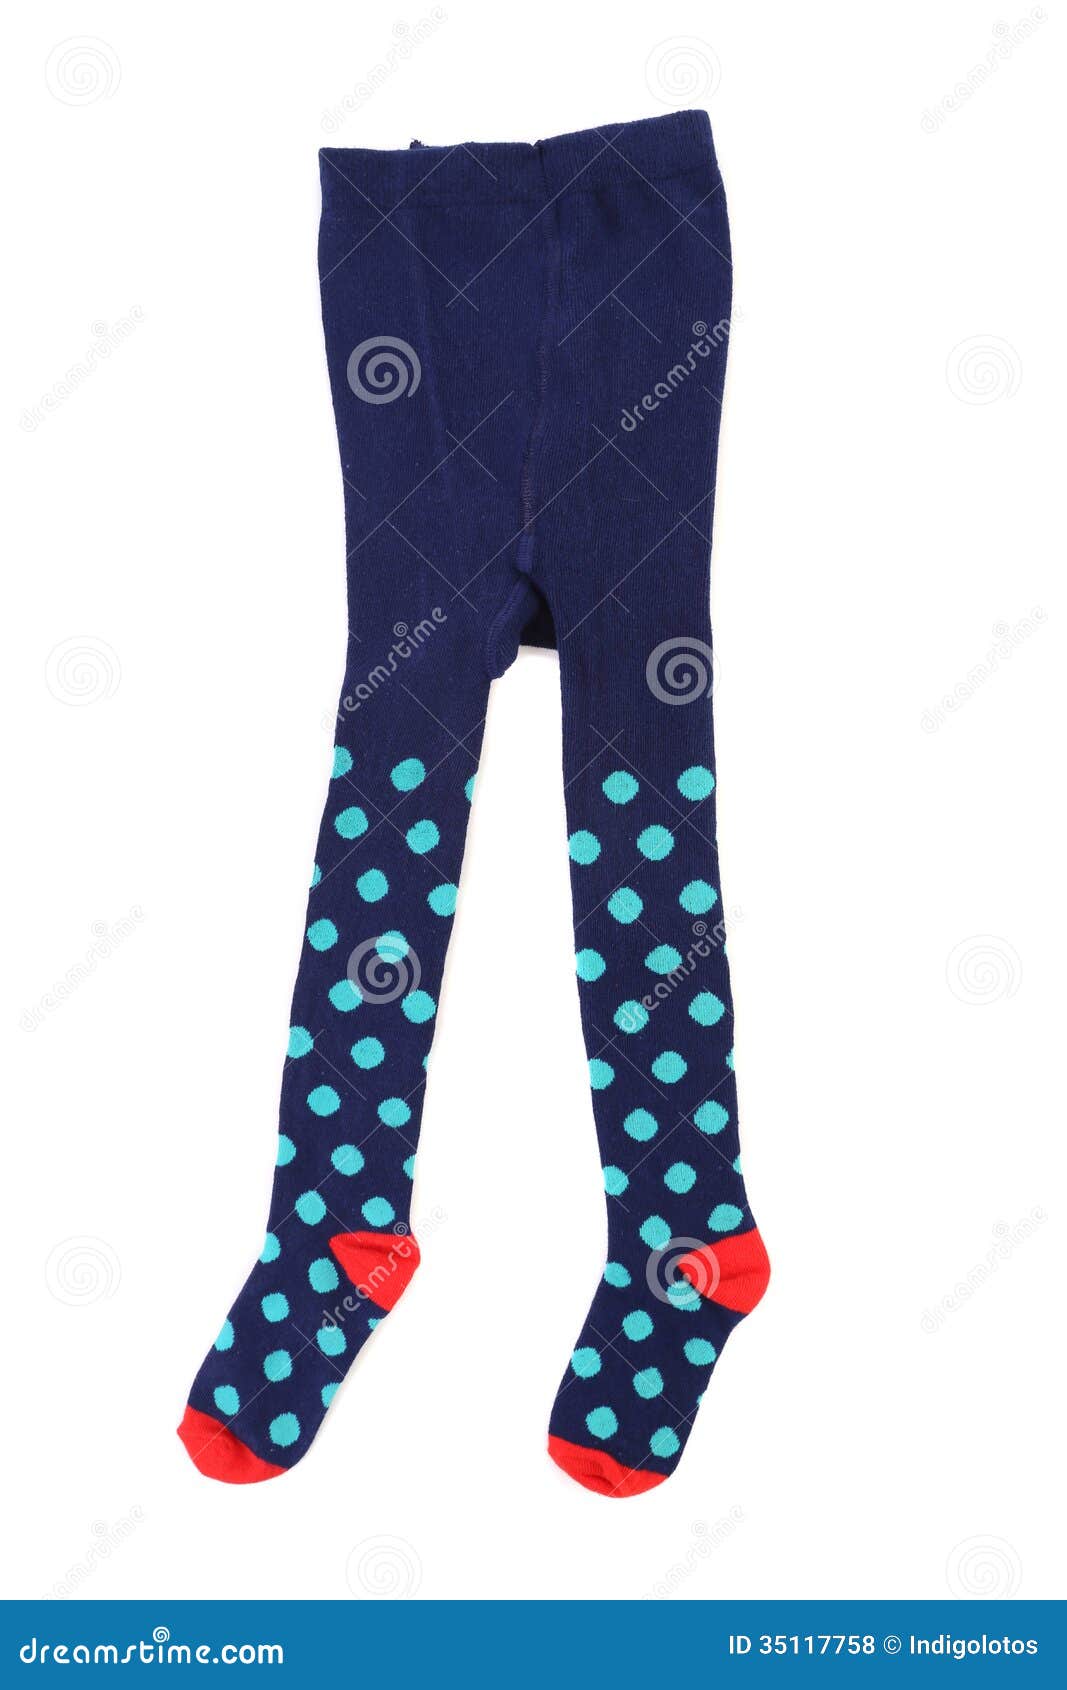 60+ Woolen Tights Stock Photos, Pictures & Royalty-Free Images